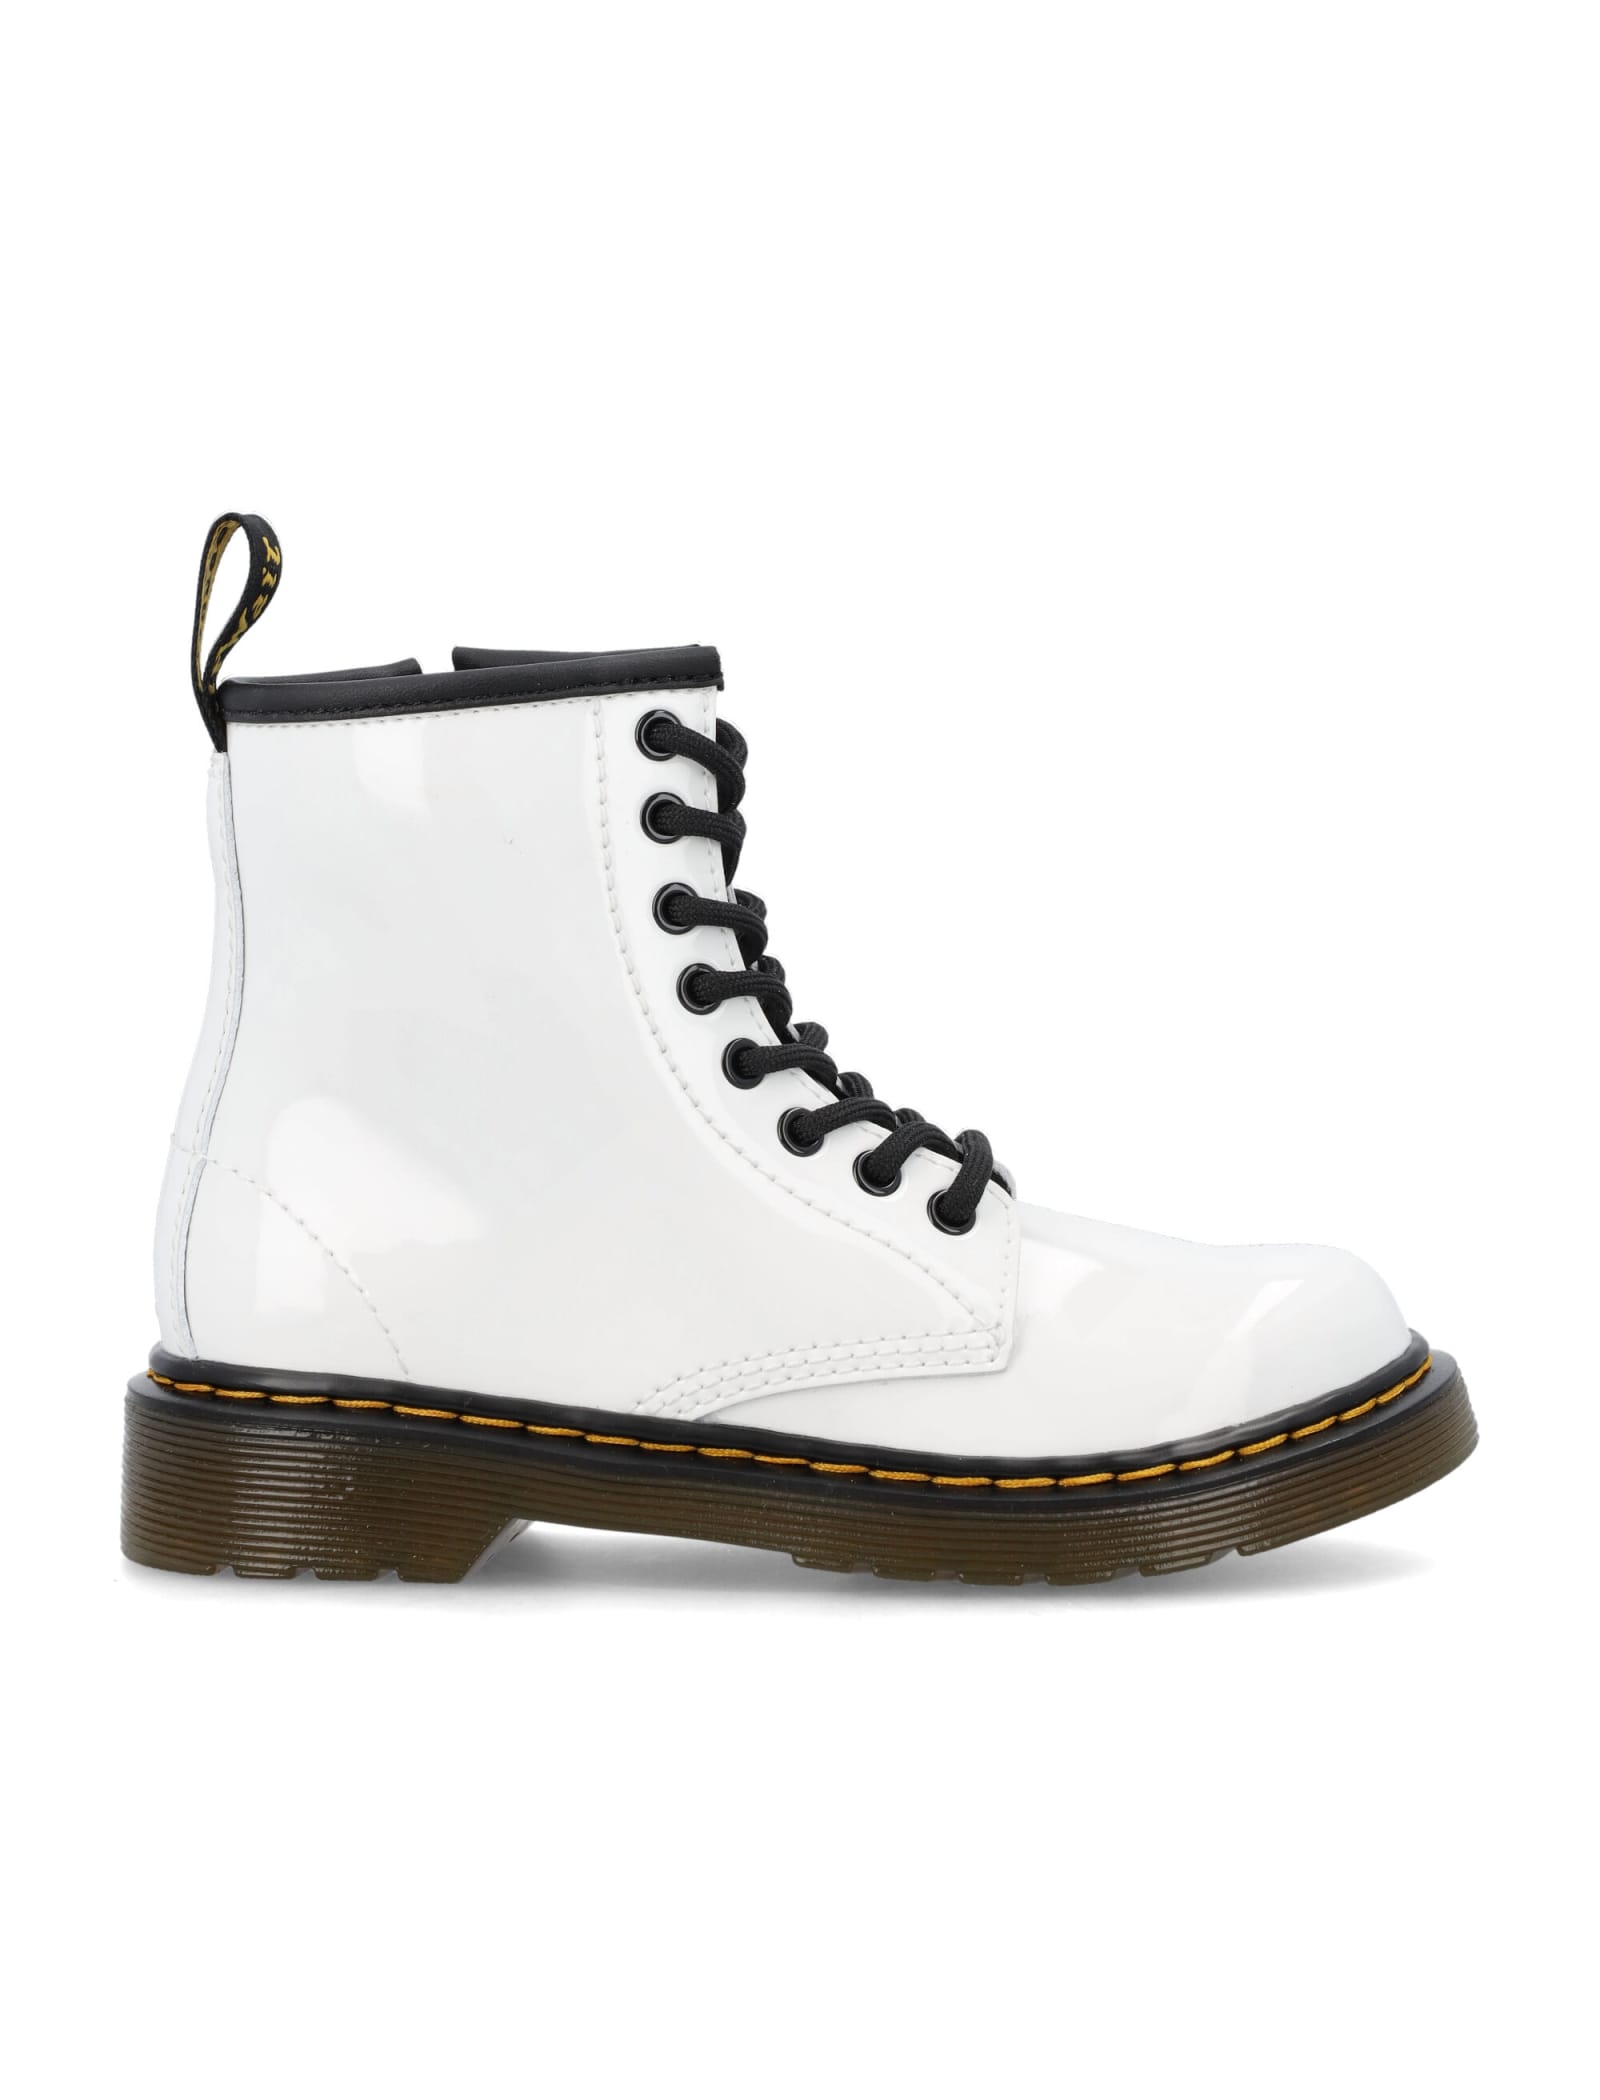 Dr. Martens' Kids' Patent Leather Lace-up Boots In White